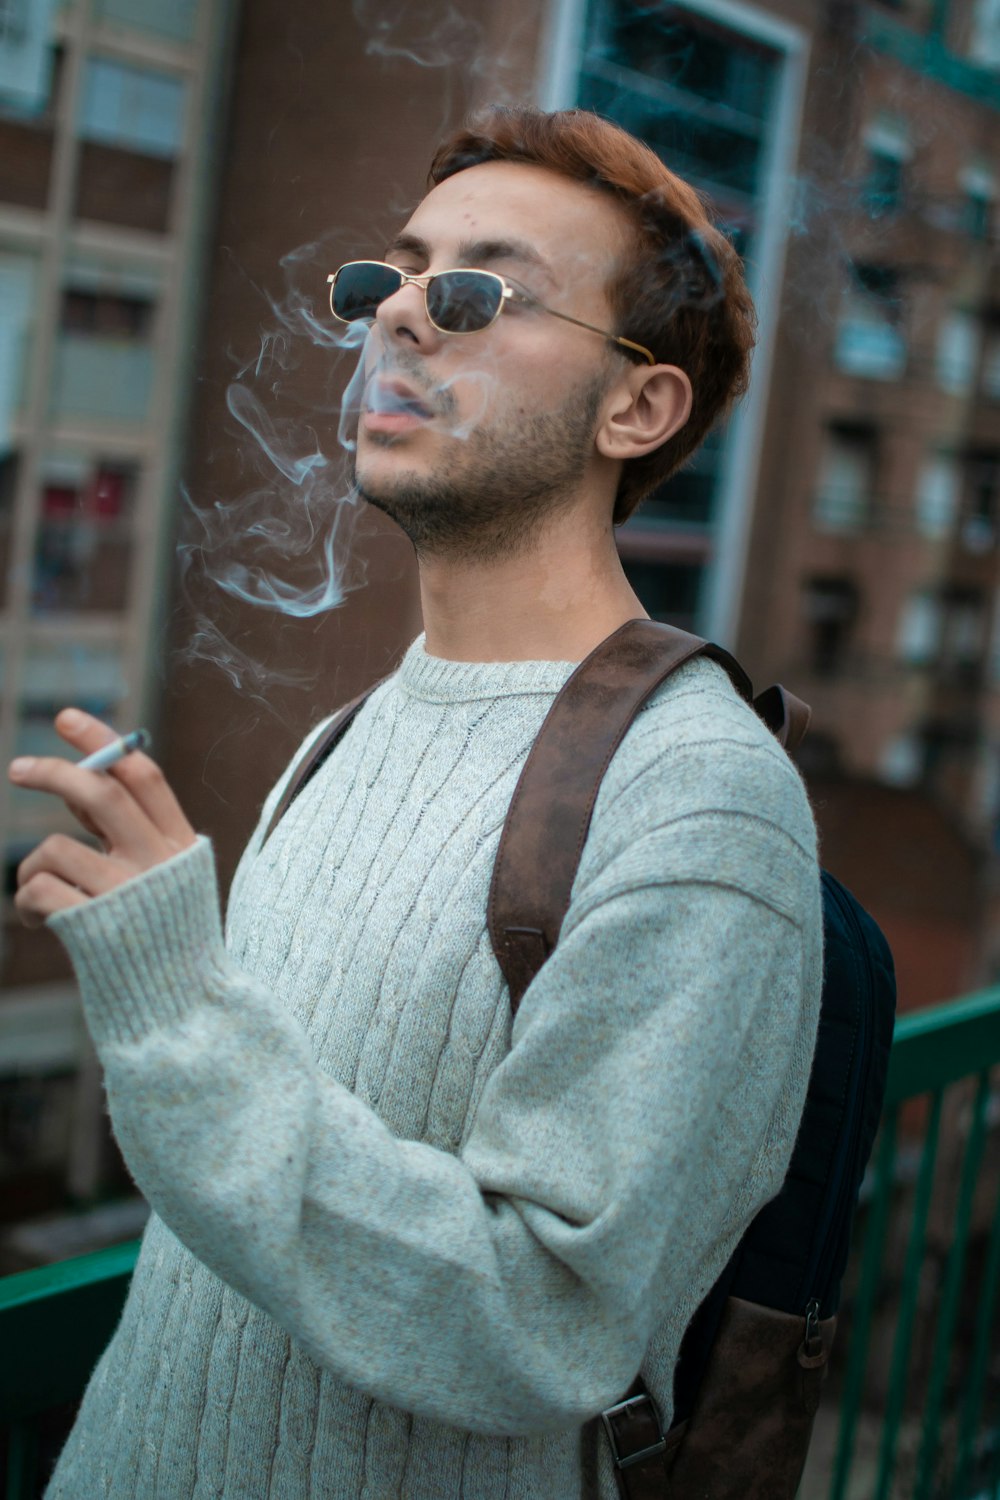 a man smoking a cigarette in front of a building